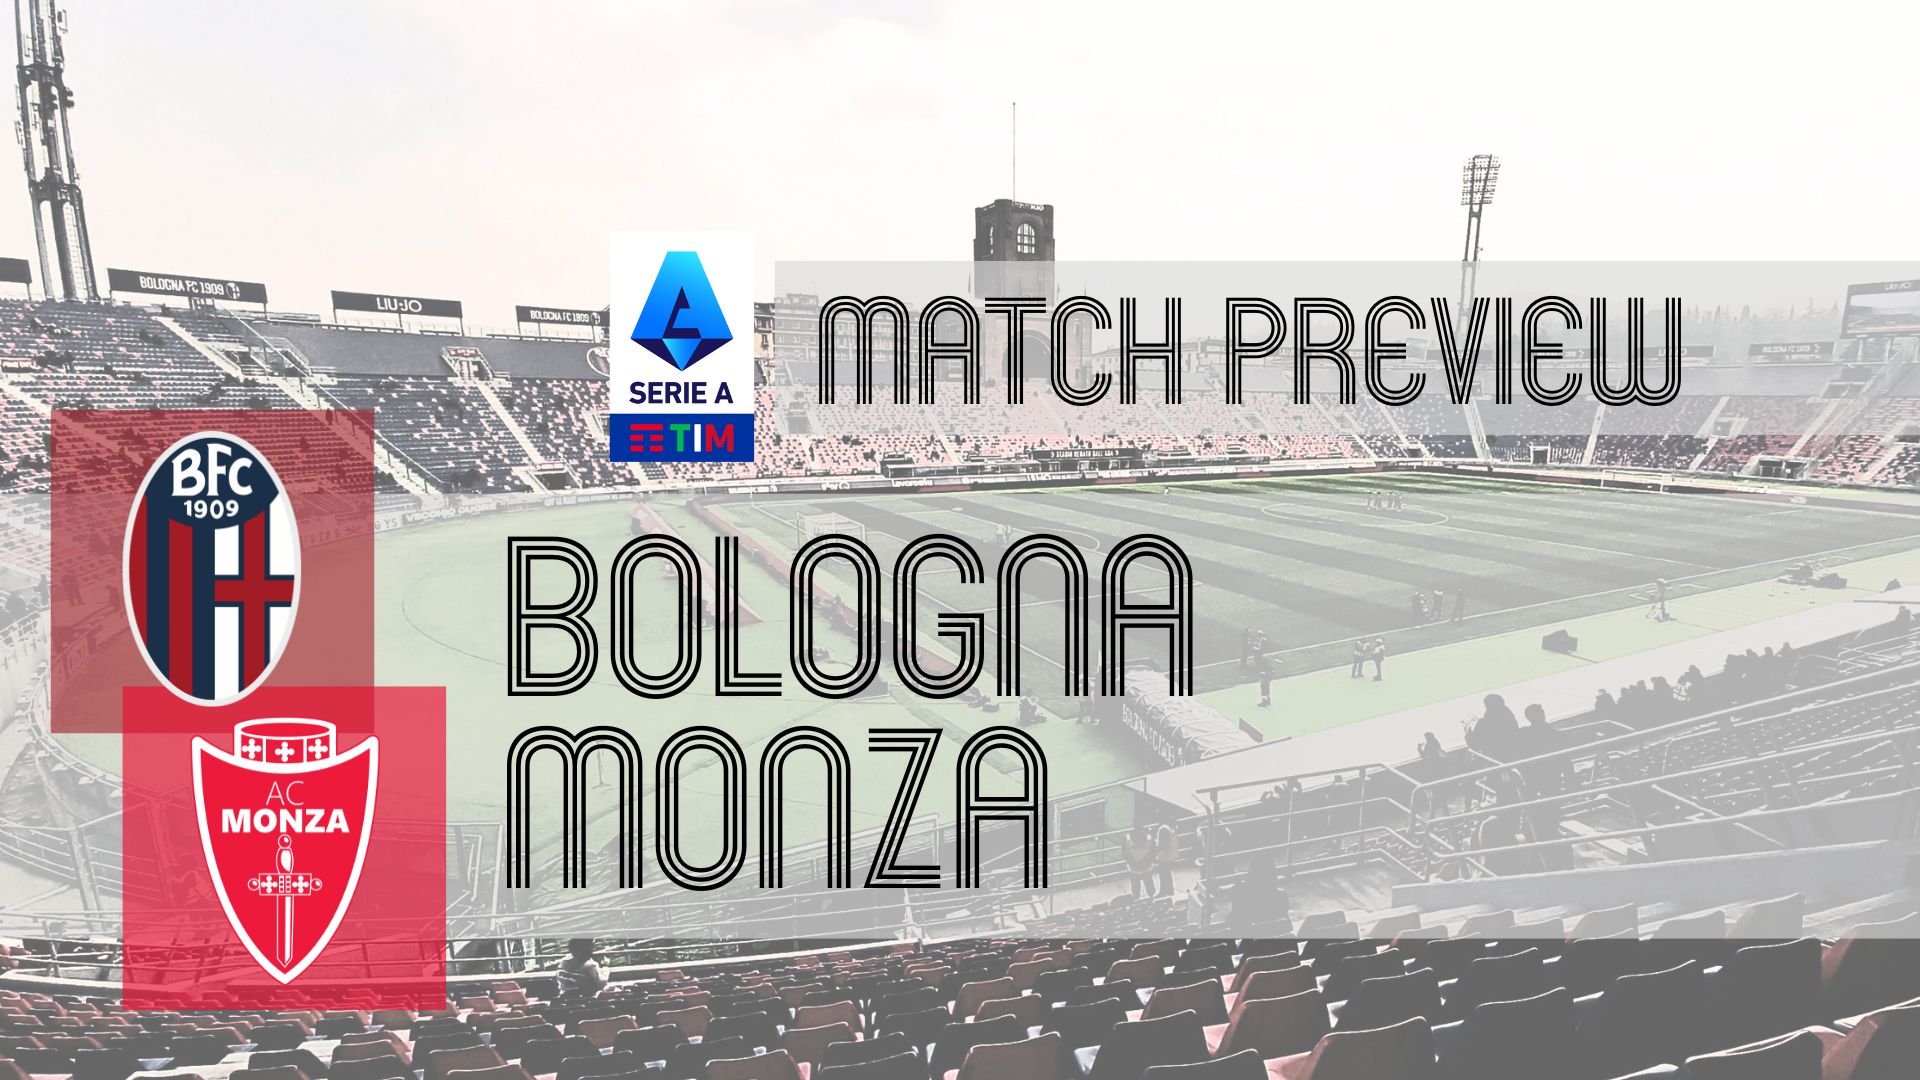 Stadio Renato Dall'Ara forms the backdrop for a handsomely-looking Serie A encounter between top-four hopefuls Bologna and mid-table Monza